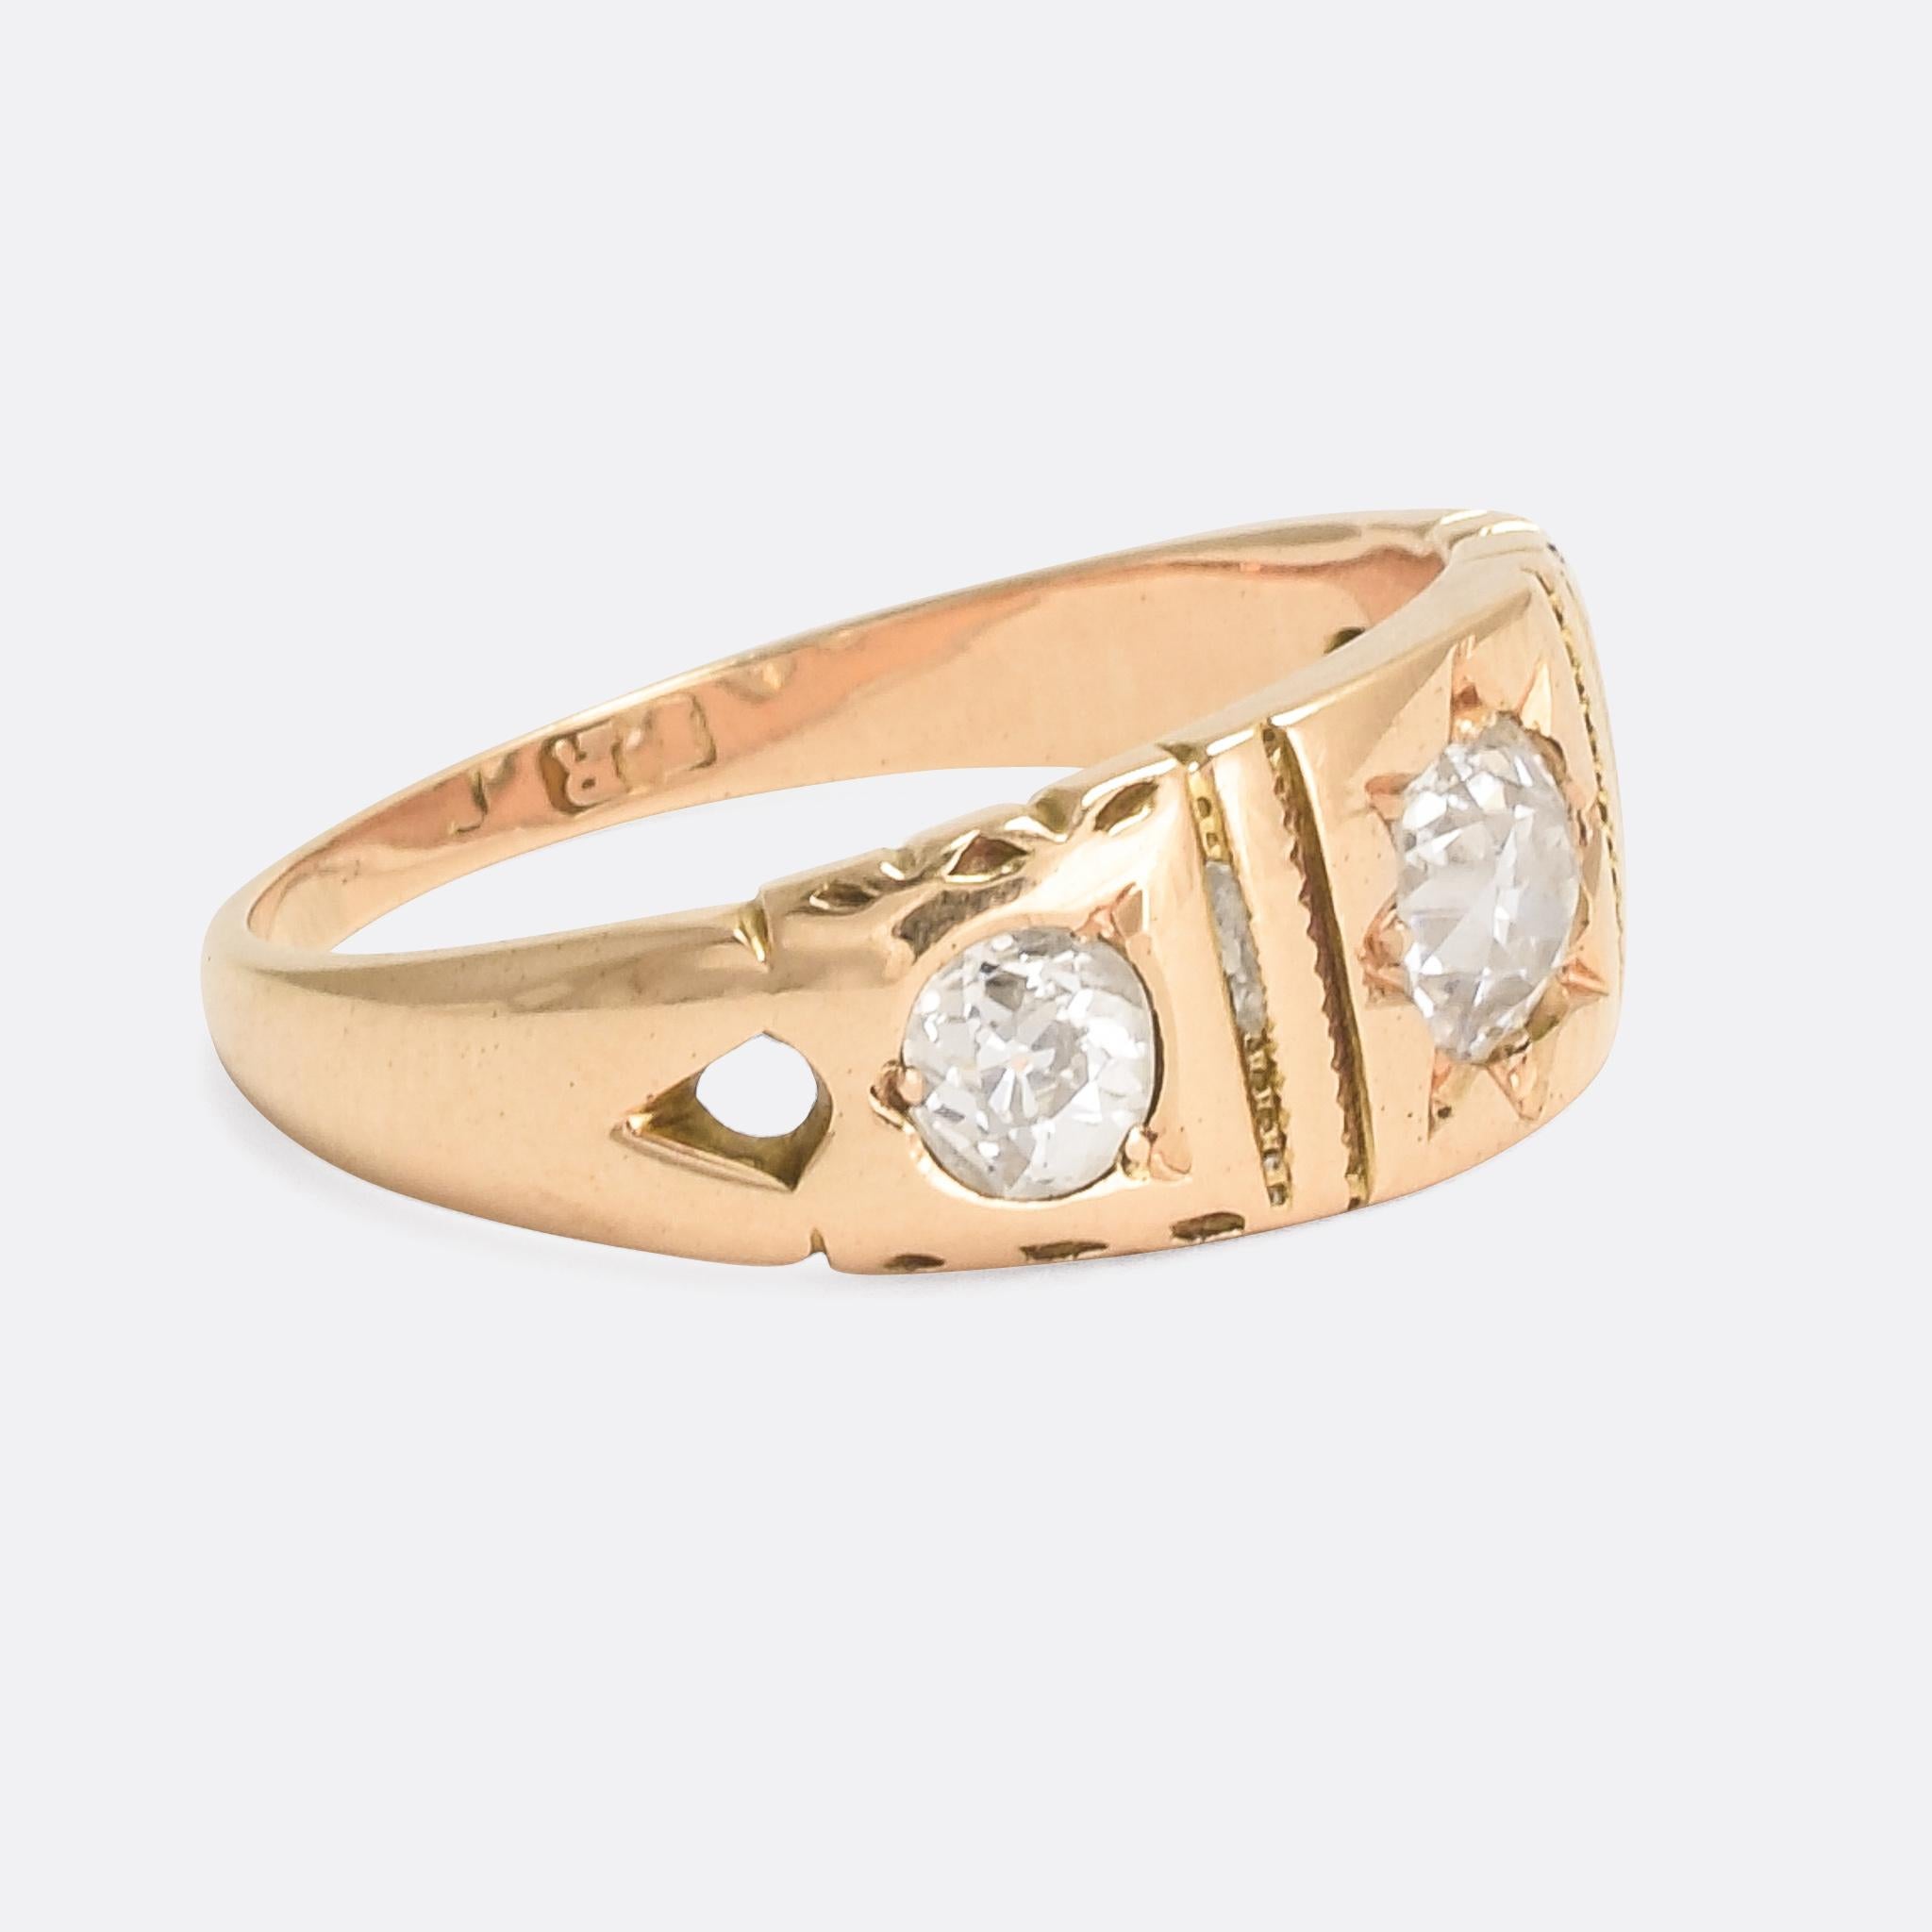 An elegant late Victorian three-stone band set with bright antique cushion cut diamonds. The detailing and craftsmanship are both excellent, with star-settings and subtly openworked shoulders. It's modelled in 18 karat yellow gold and dates from